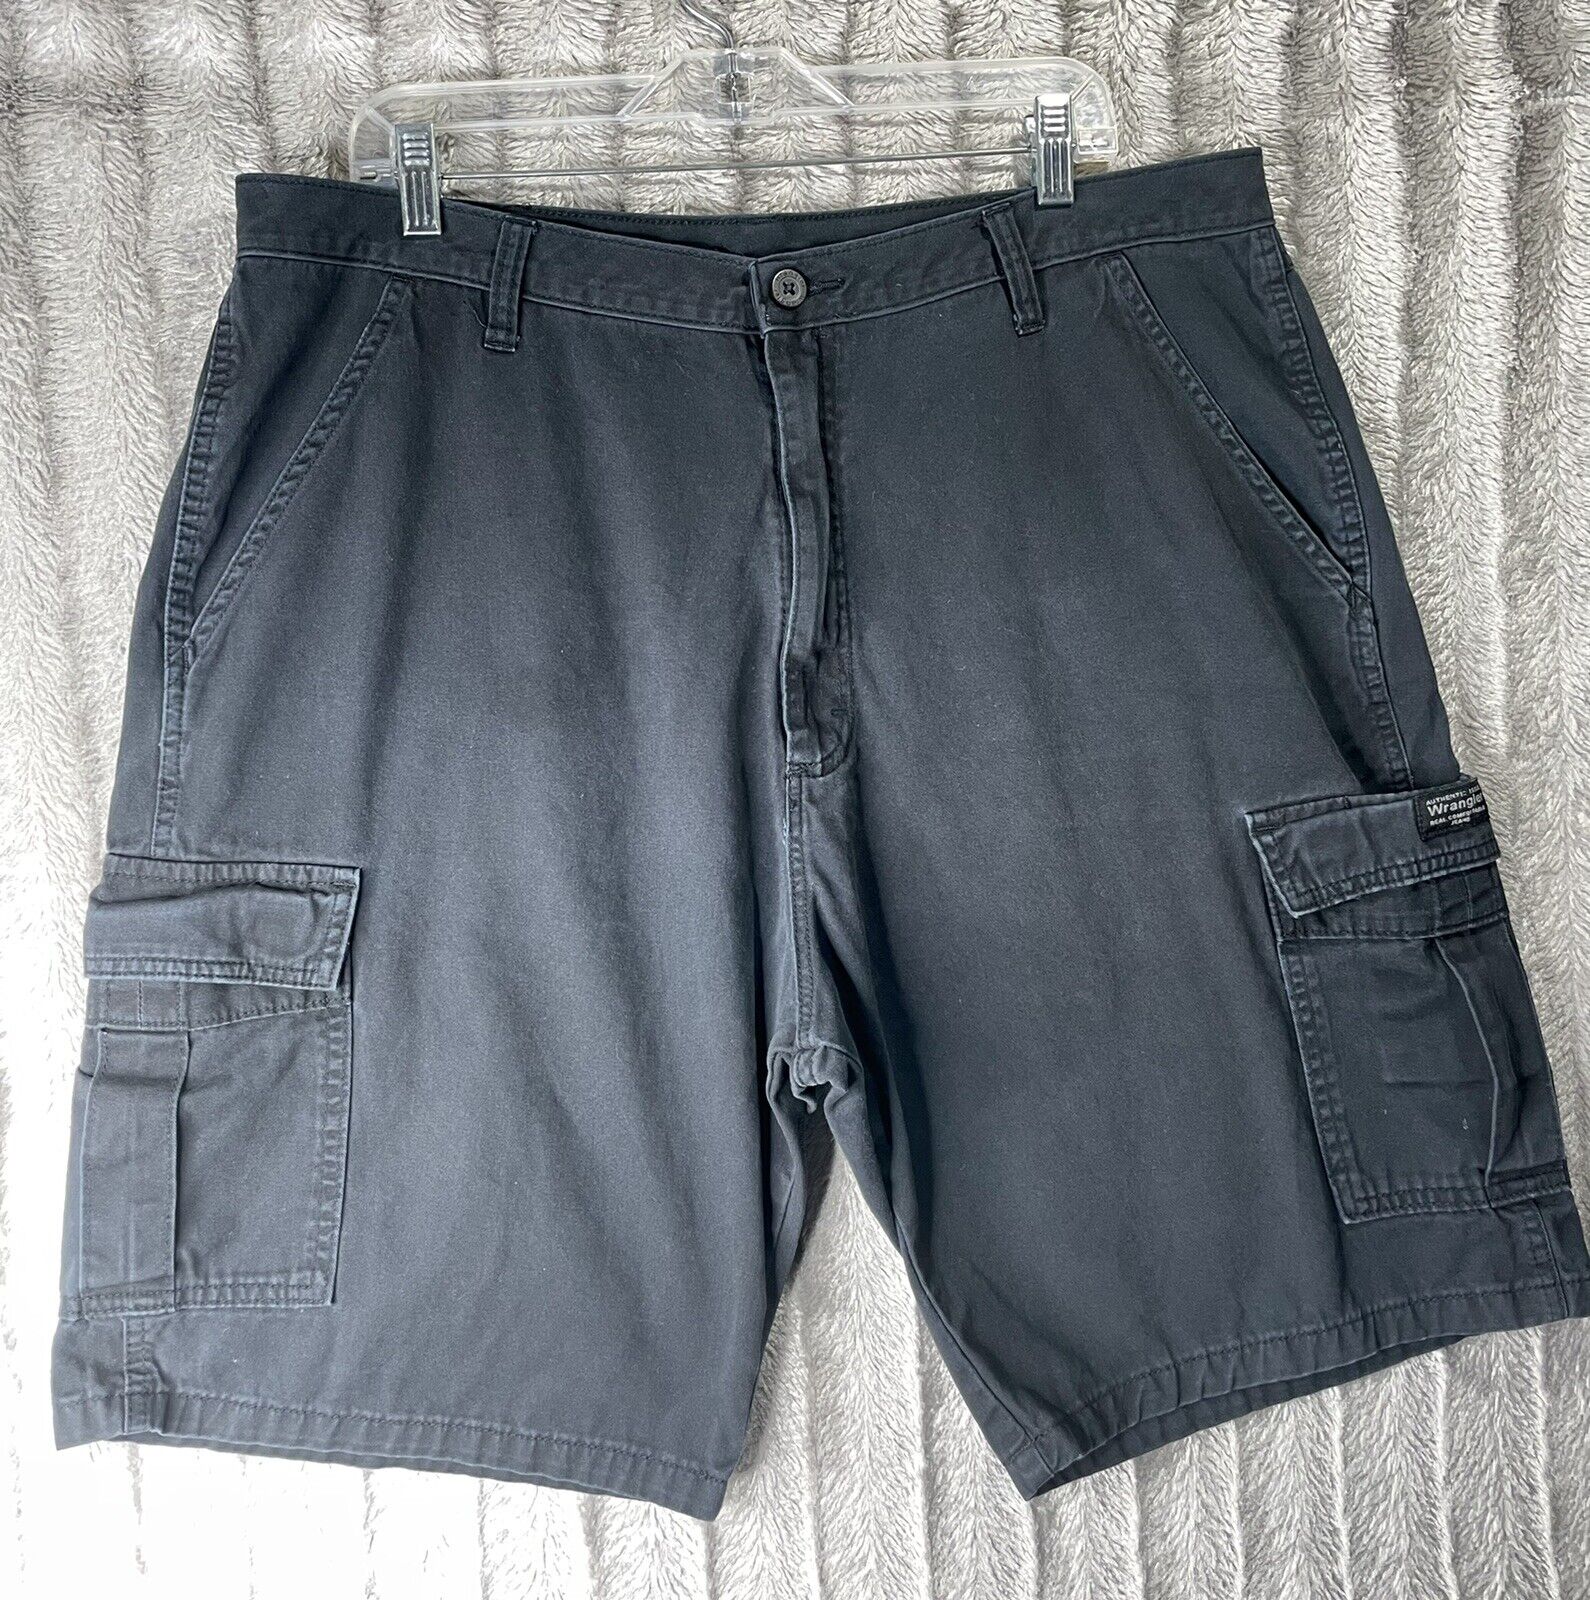 Authentic Issue wrangler real comfortable jeans Mens cargo shorts black  size 38 | eBay